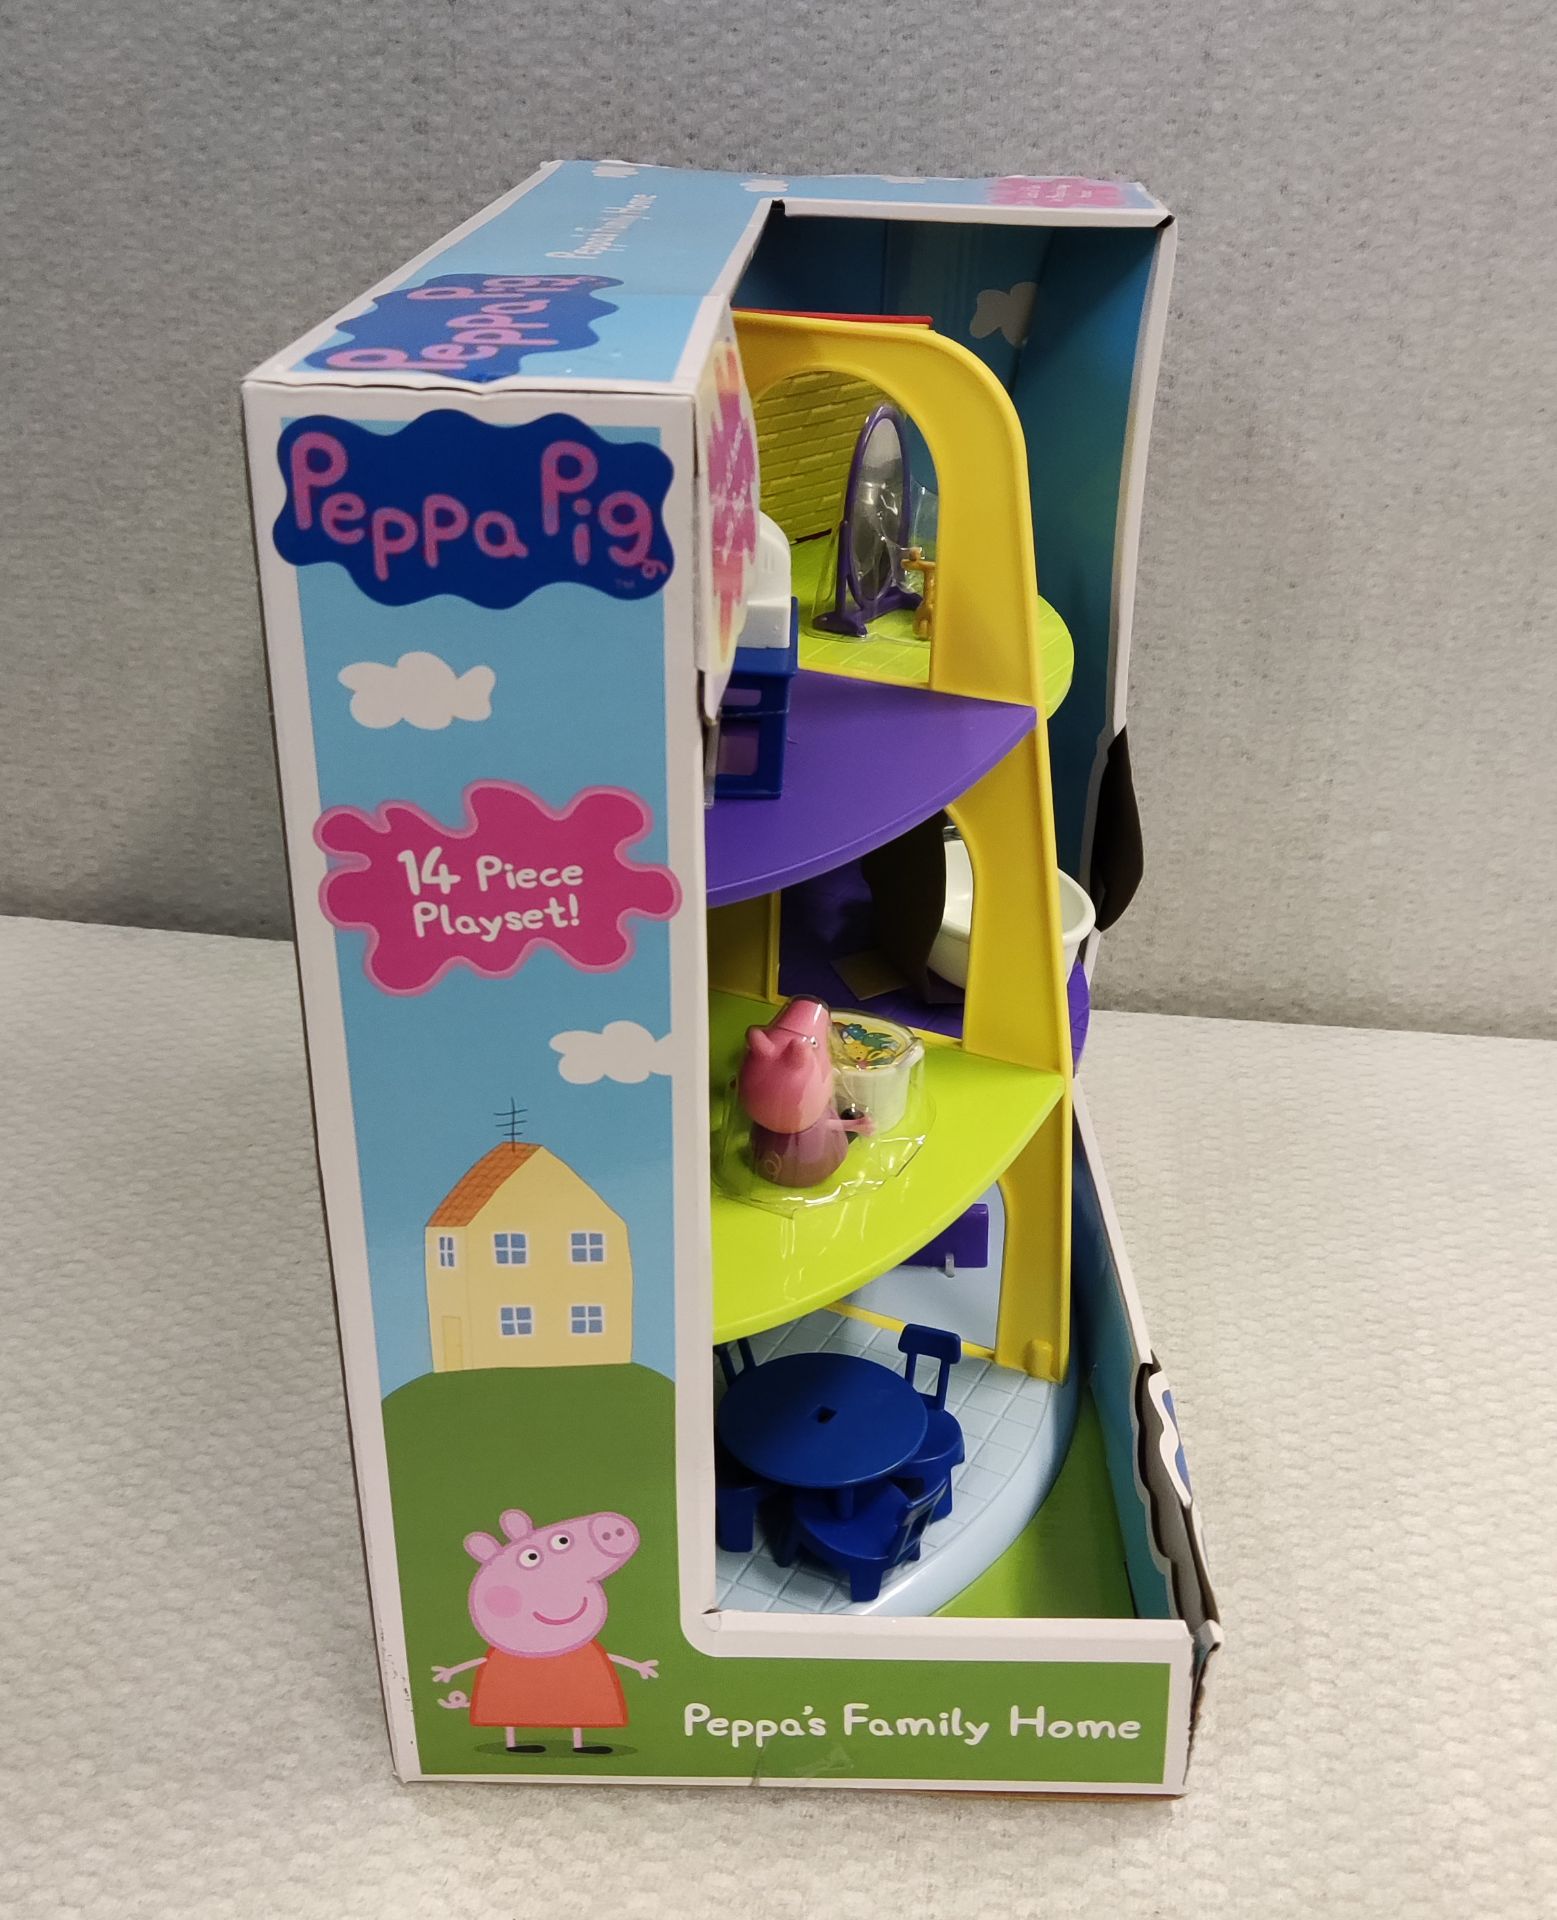 1 x Peppa Pig Peppa's Family Home Play Set - New/Boxed - Image 4 of 6